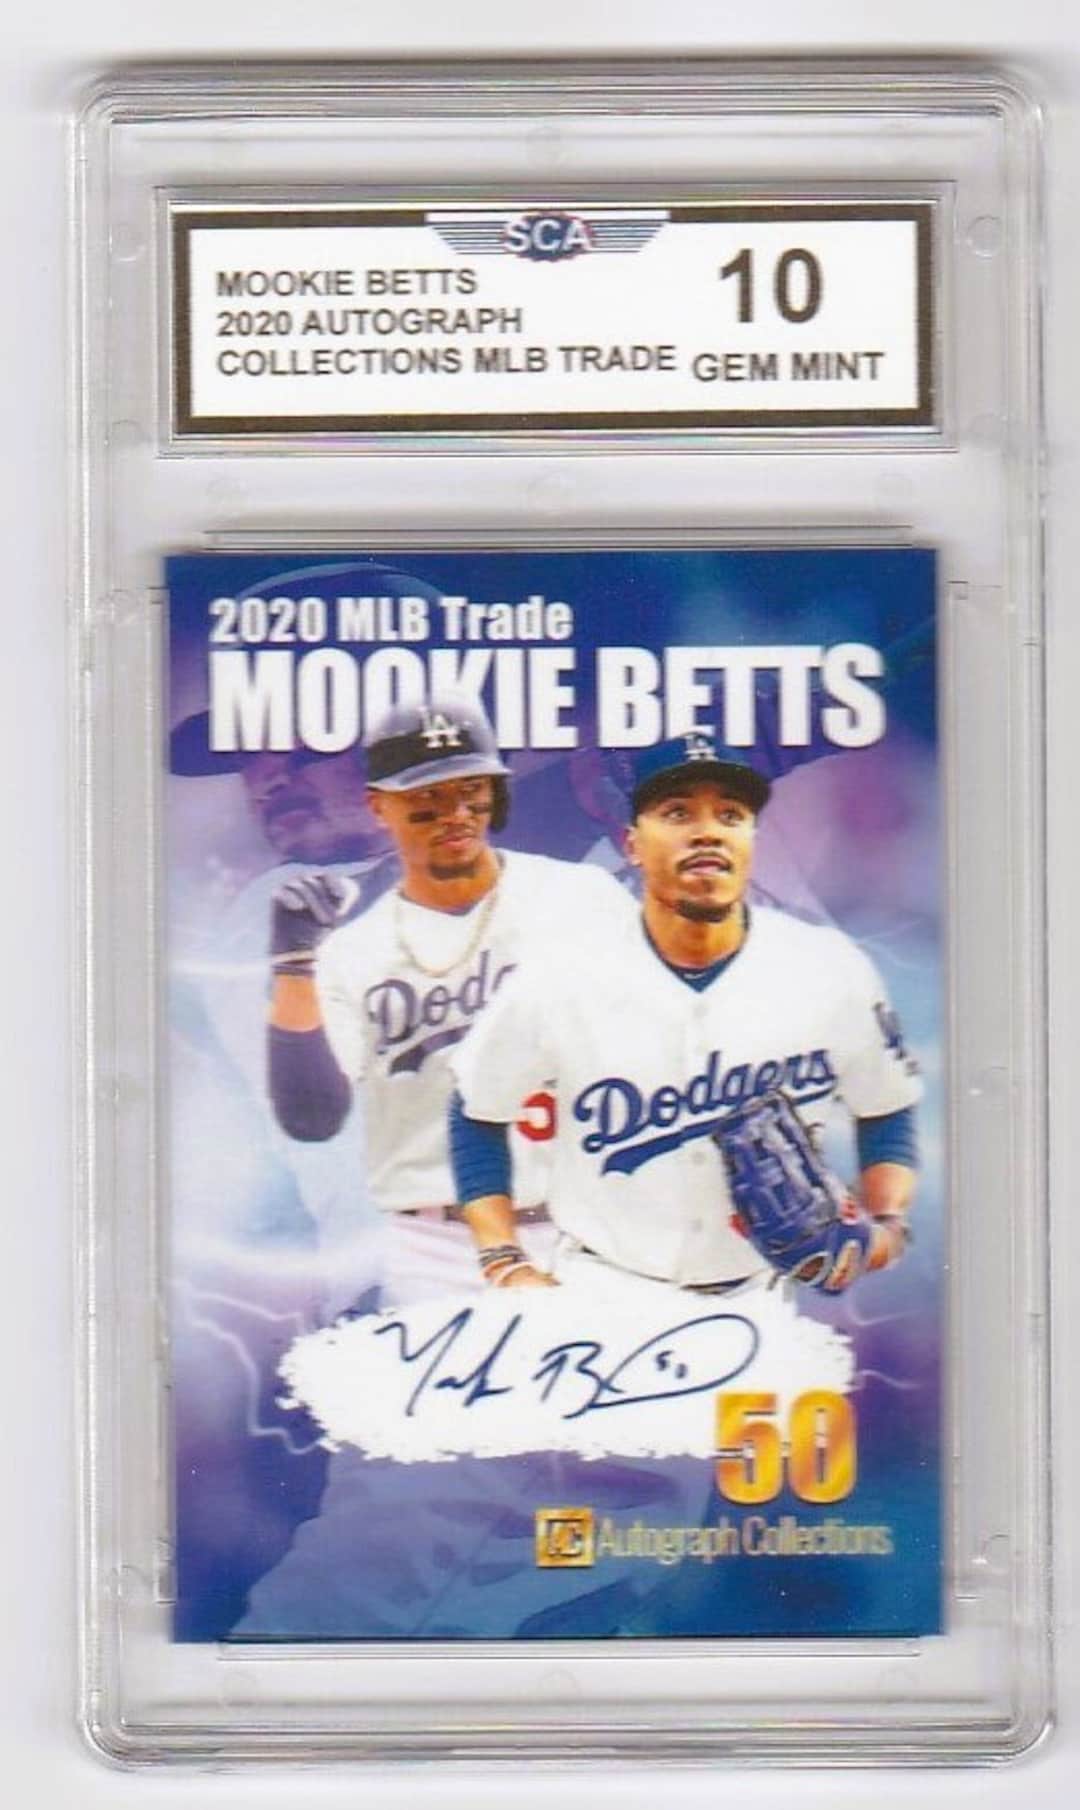 MOOKIE BETTS 2020 AUTOGRAPH Collectors Mlb Trade Card Printed 